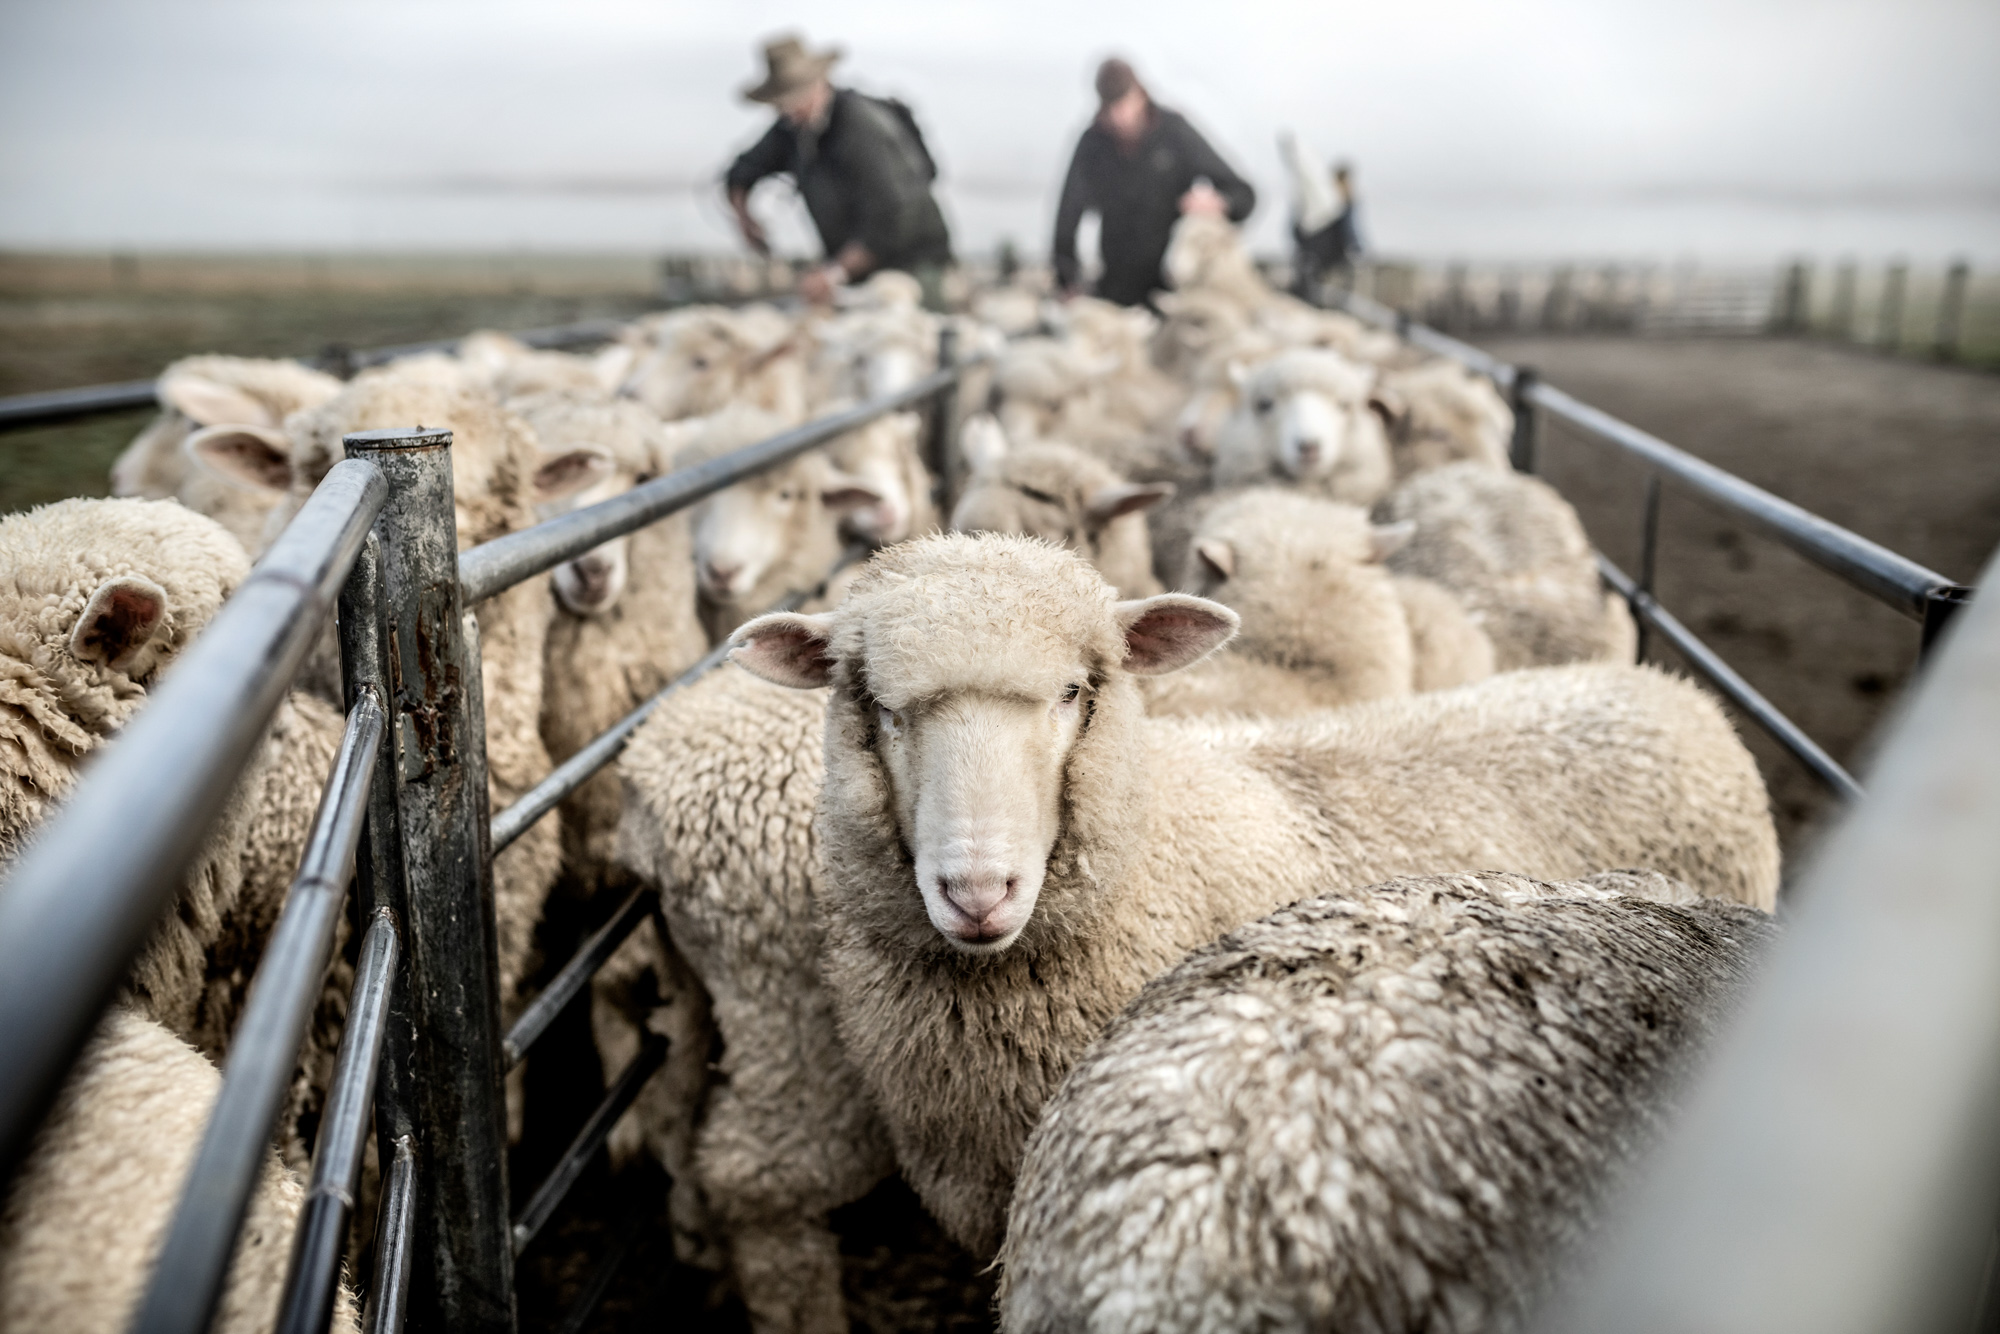 merino sheep standing in pen in new zealand with farmers in background